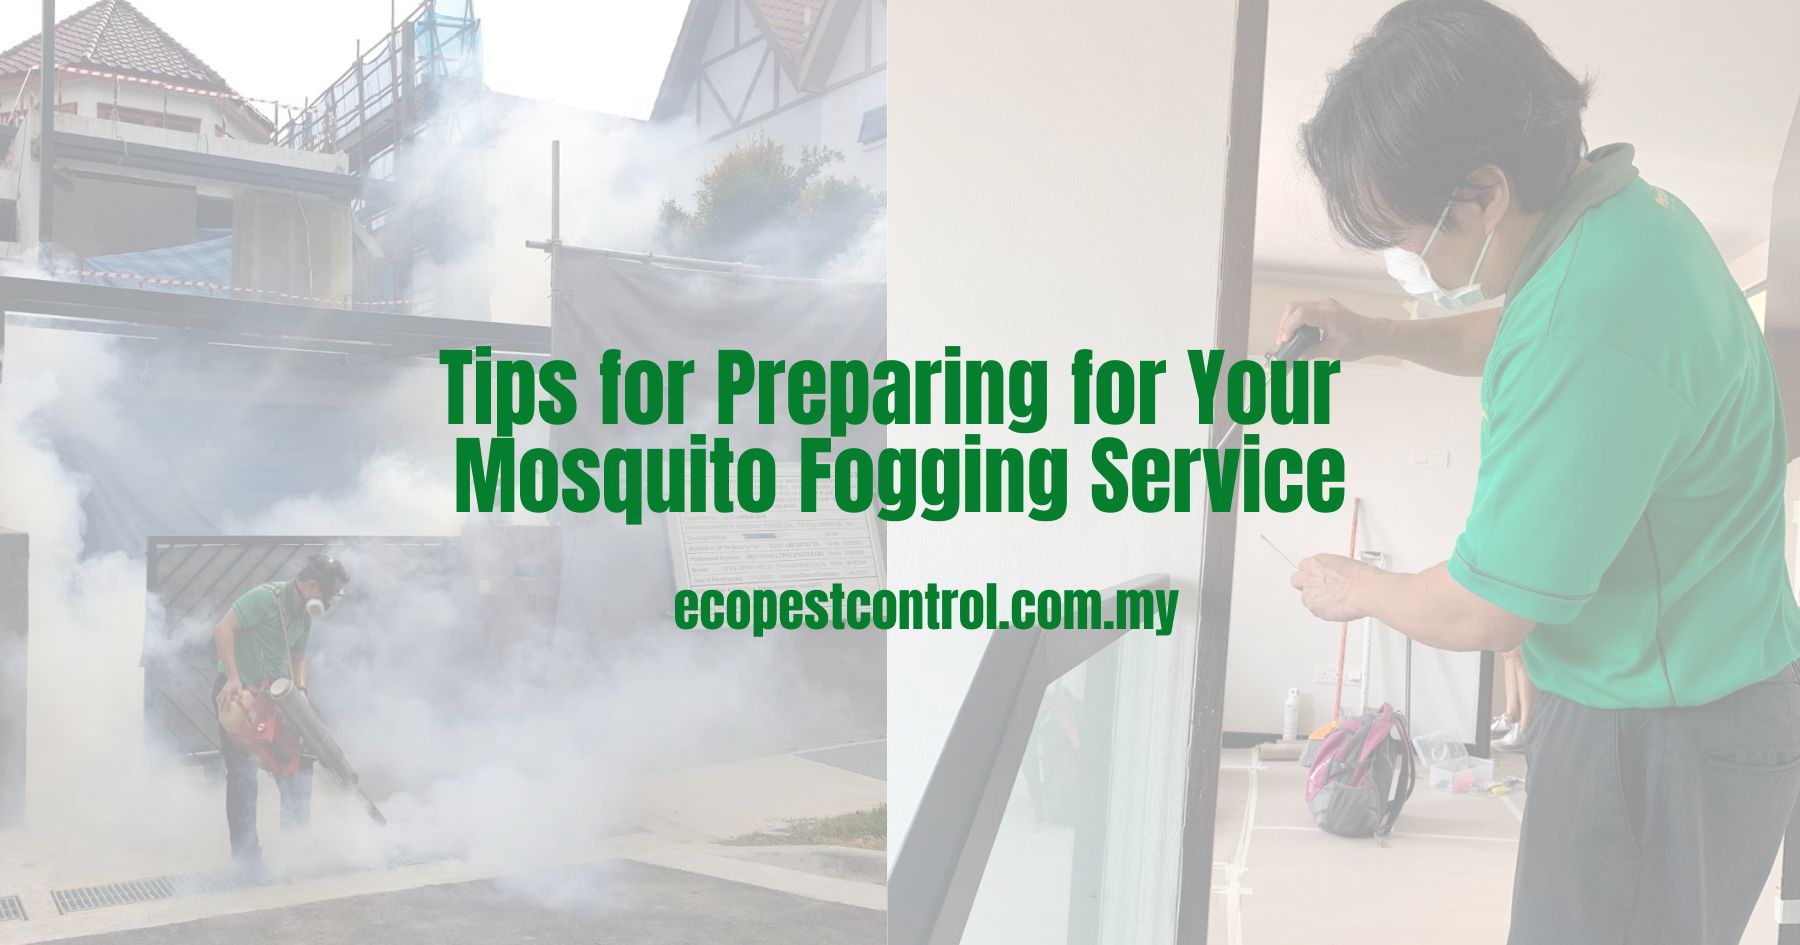 Tips for Preparing for Your Mosquito Fogging Service